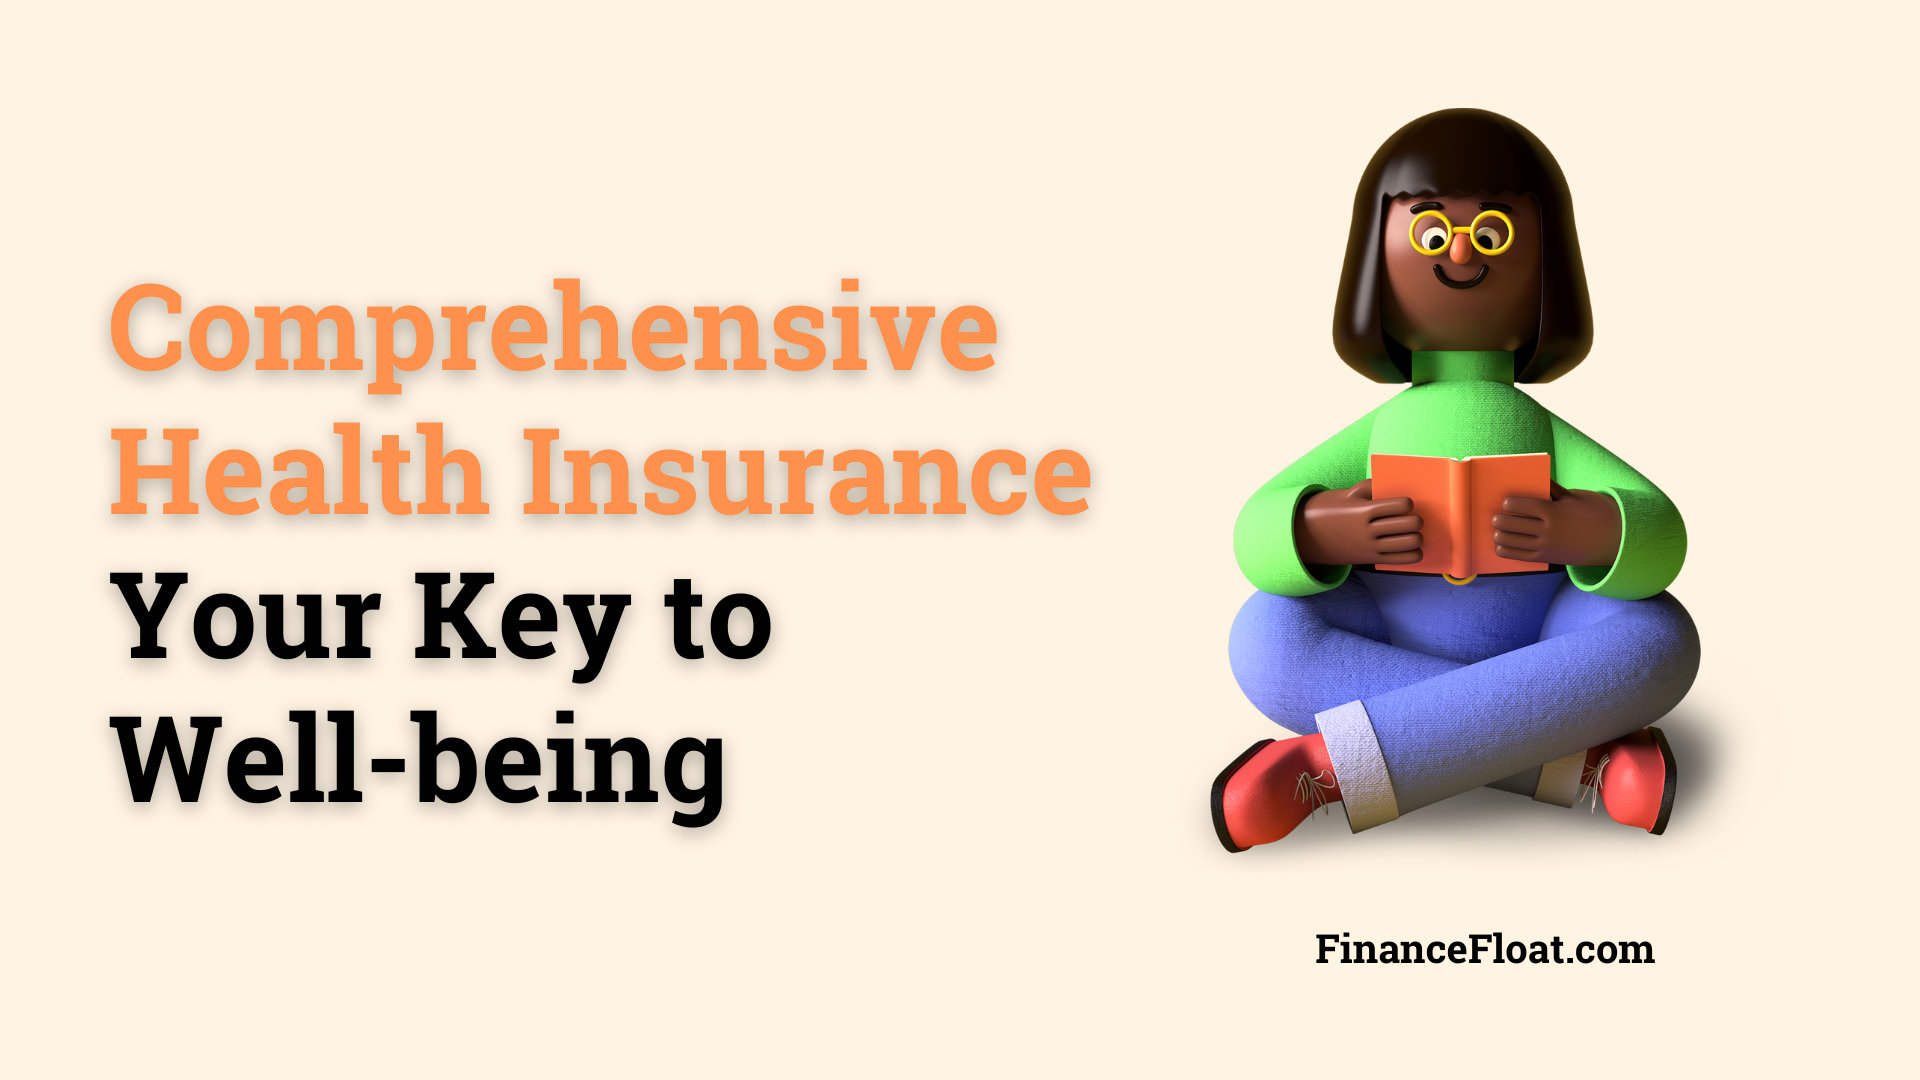 Comprehensive Health Insurance Your Key to Well-being